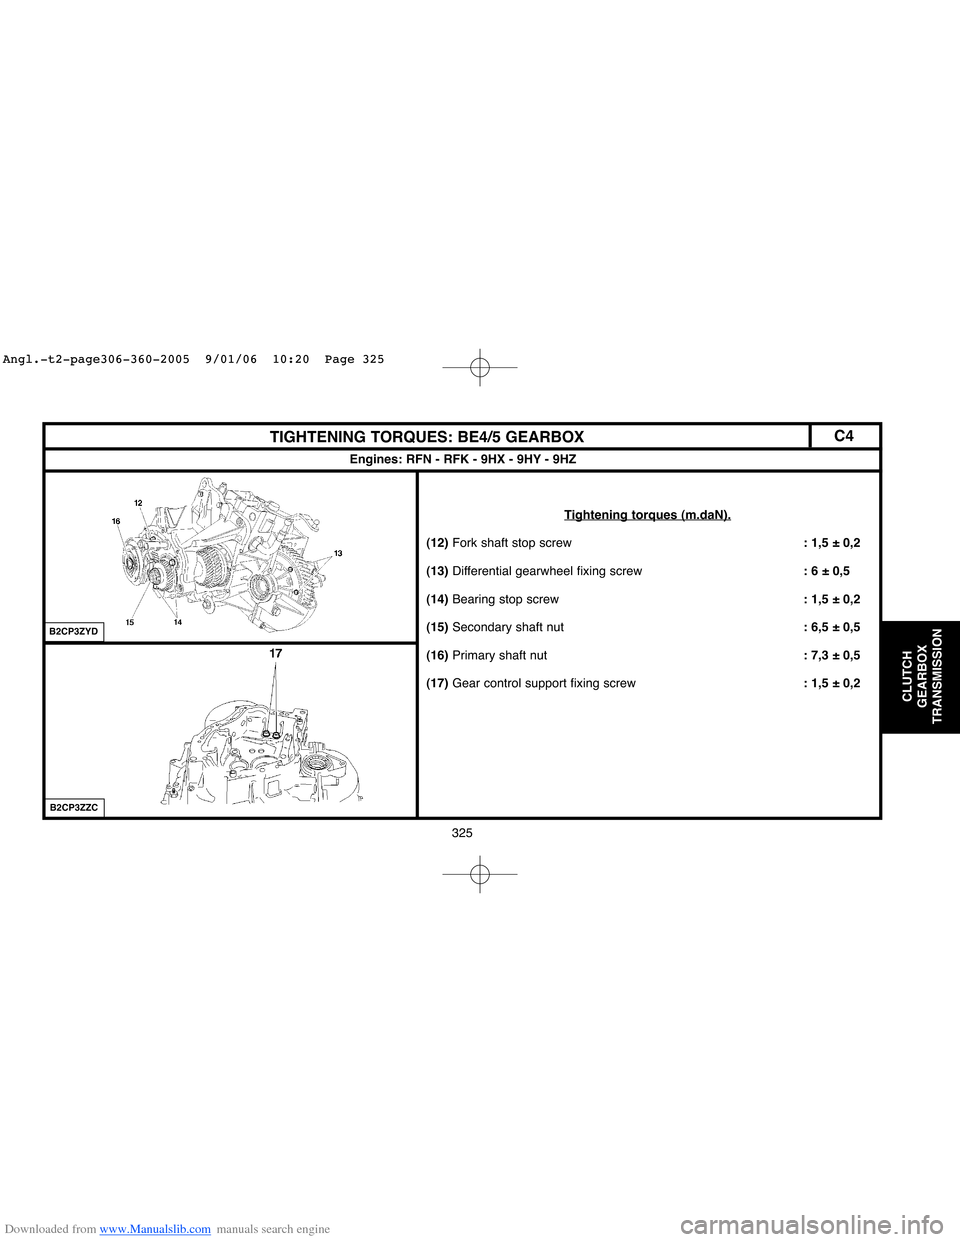 Citroen C4 2005 2.G Workshop Manual Downloaded from www.Manualslib.com manuals search engine 325
CLUTCH
GEARBOX
TRANSMISSION
TIGHTENING TORQUES: BE4/5 GEARBOX
Engines: RFN - RFK - 9HX - 9HY - 9HZ
Tightening torques (m.daN).
(12)Fork sha